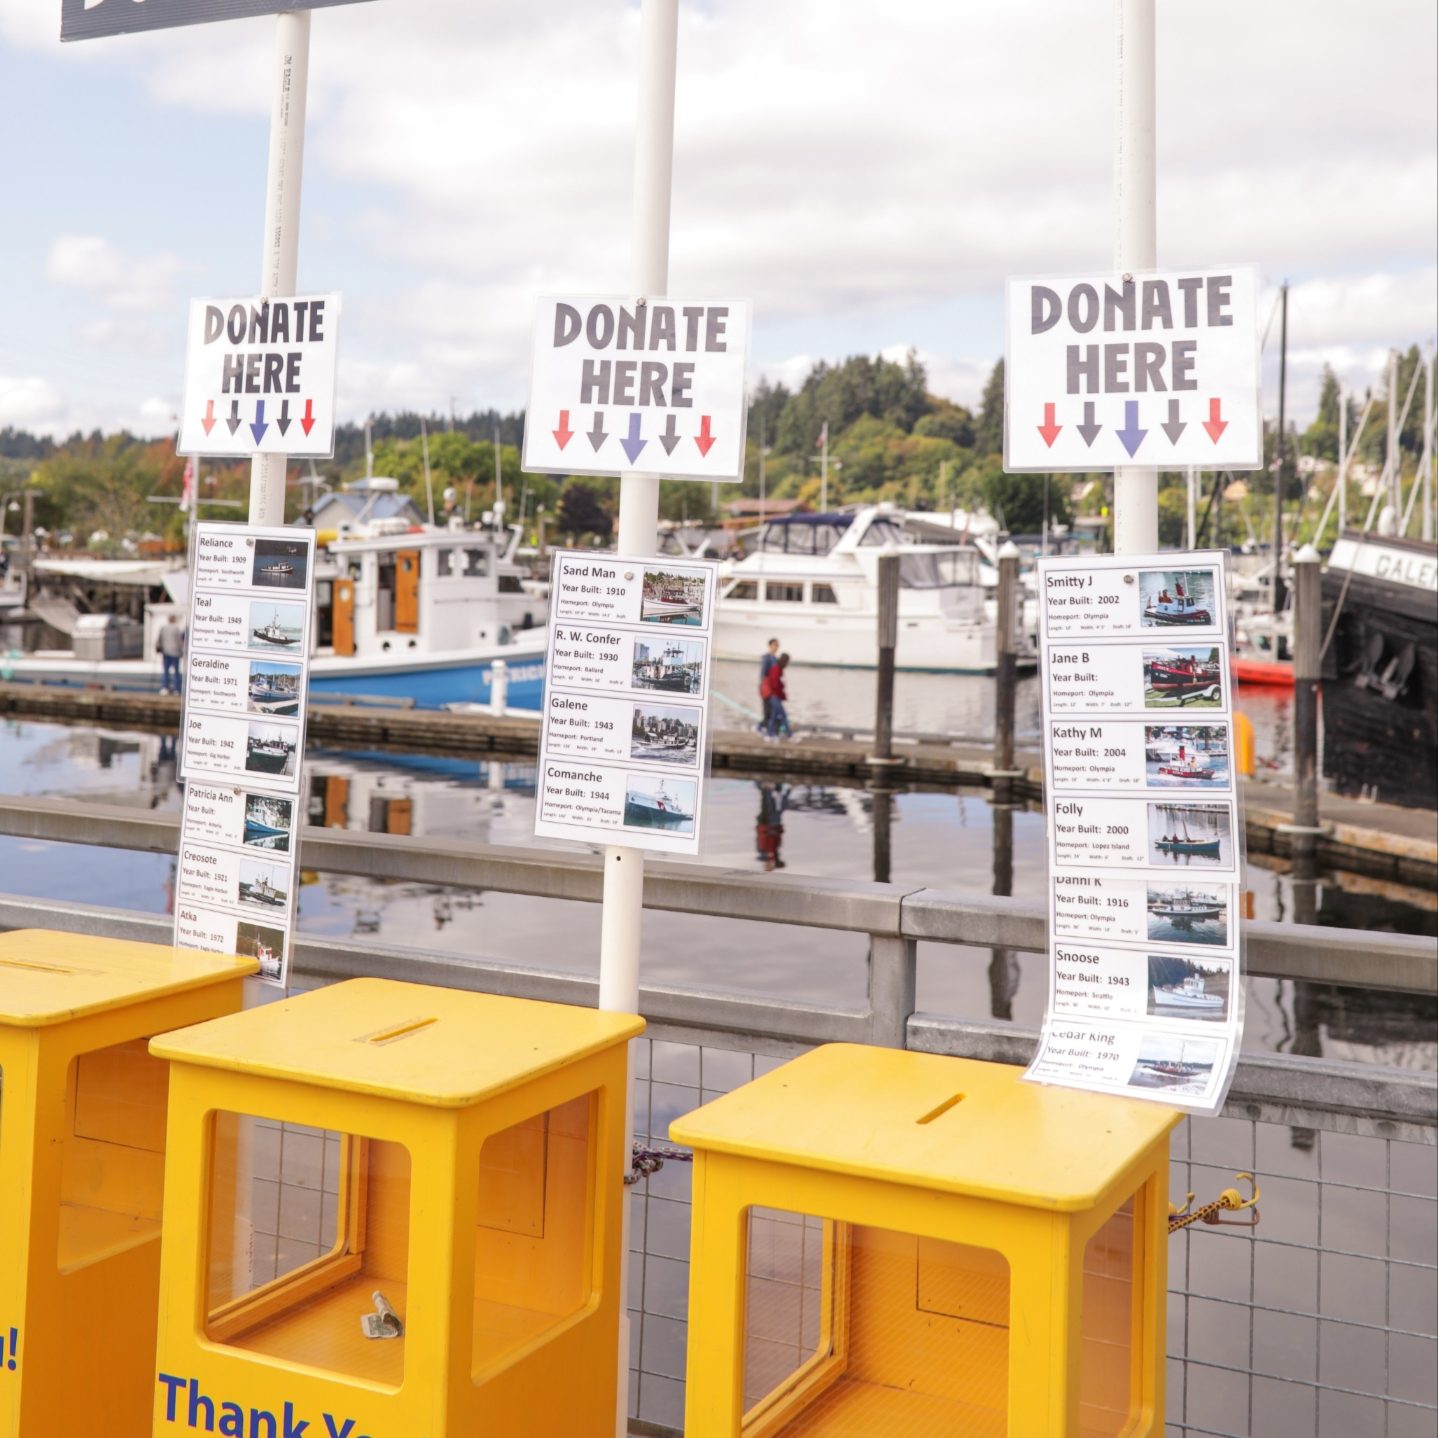 3 Yellow boxes with signs that say, 'donate here' and a large sign above it them that says, 'Donate Here and Thank you!' with the Olympia Harbor Days logo and drawings of tug boats